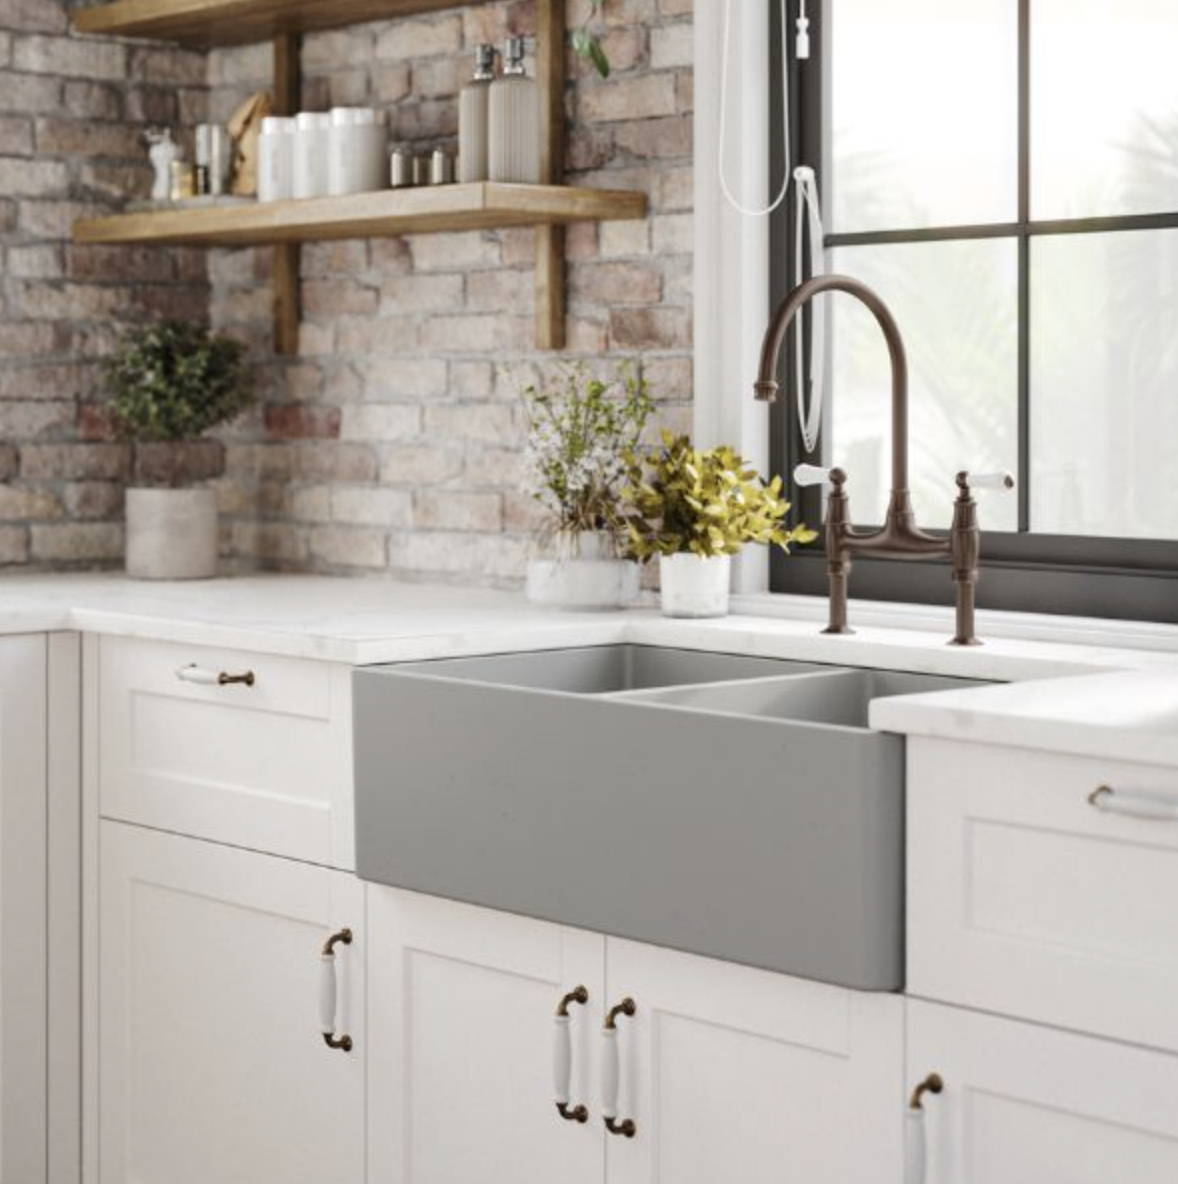 Rustic kitchen with exposed brick, white cabinetry, farmhouse style sink and traditional cabinet handles 